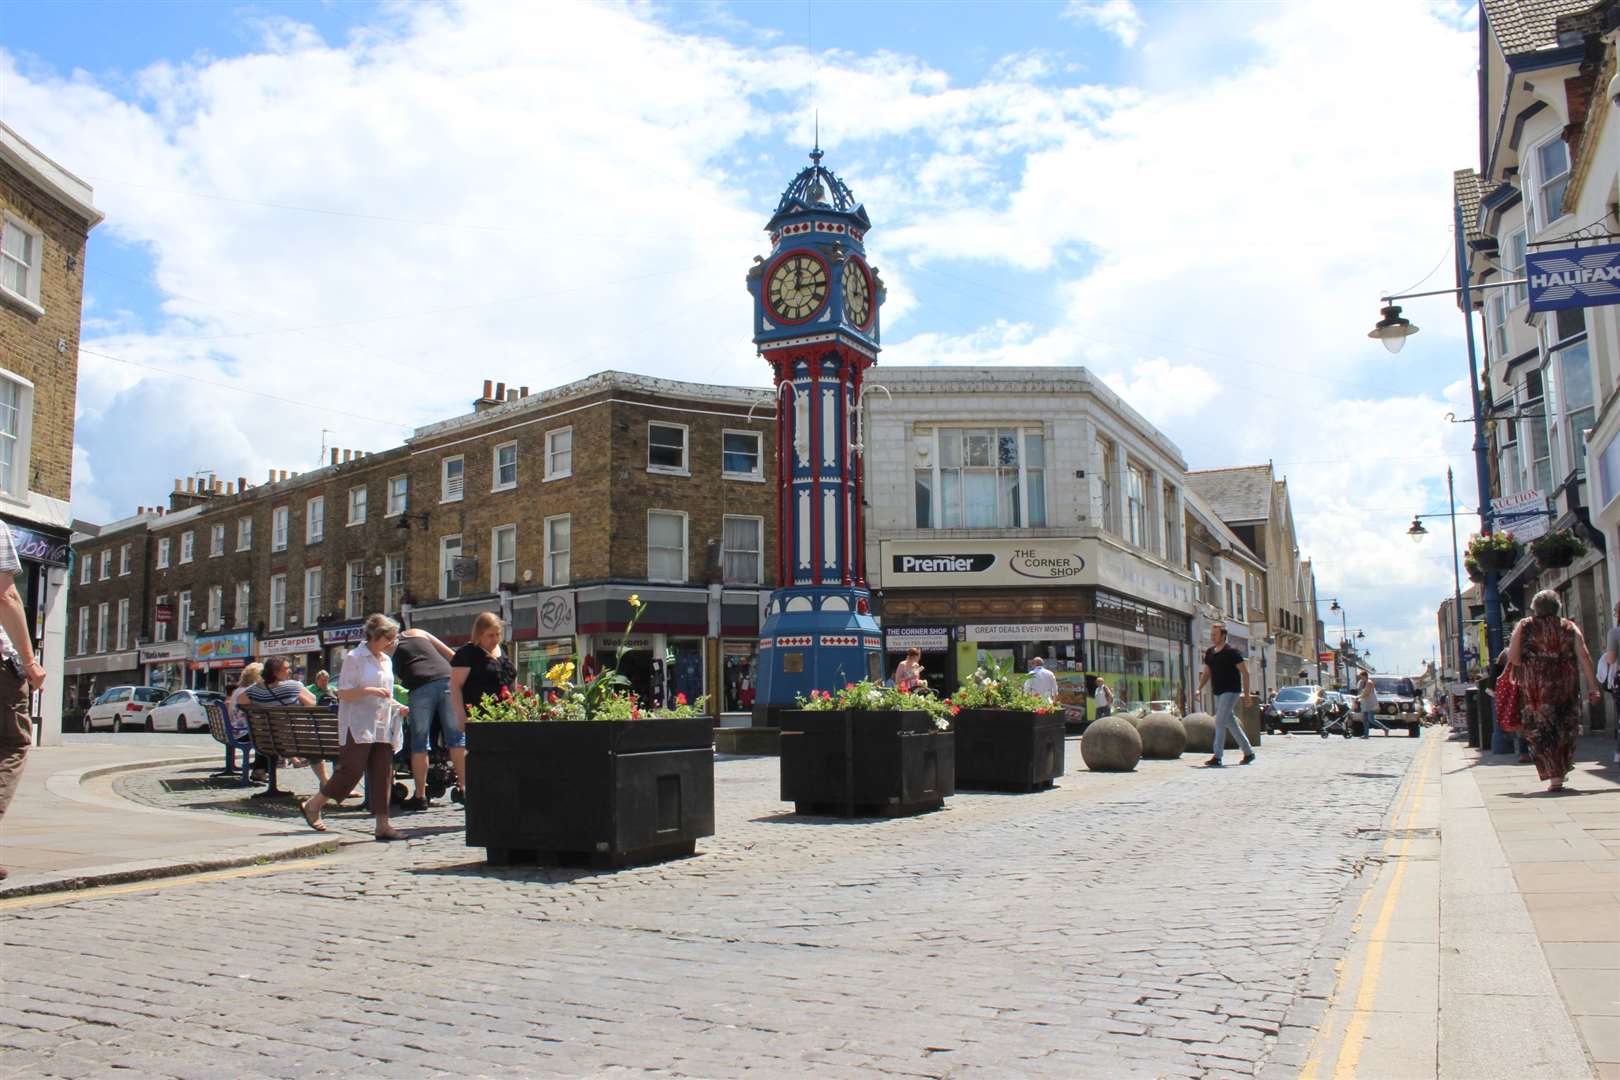 The Sheerness clock tower